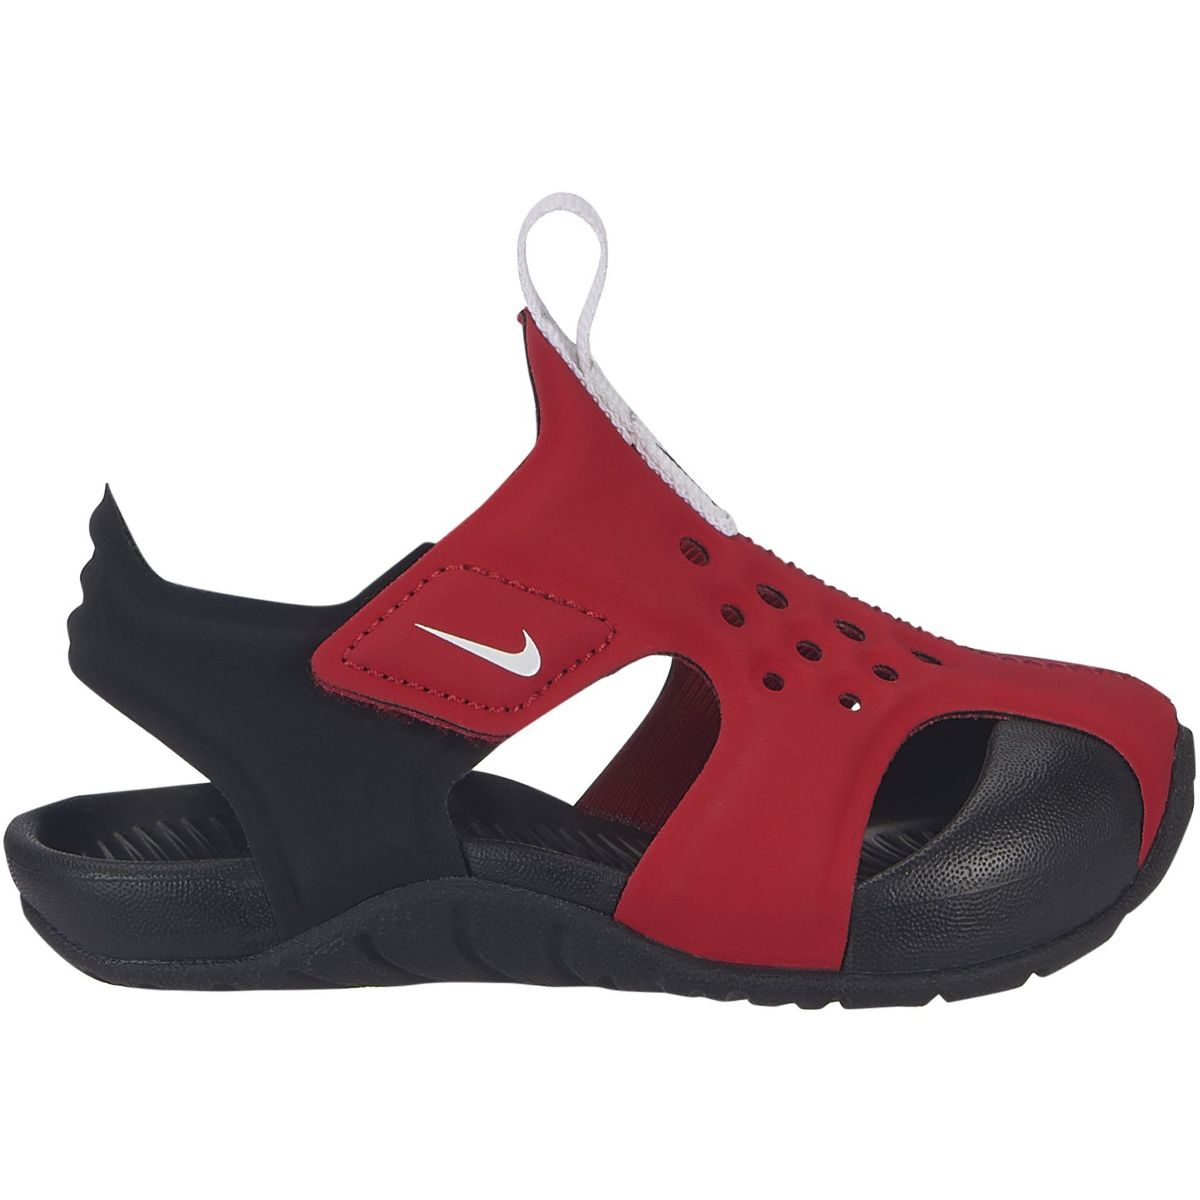 Nike Sunray Protect 2 Boy's Toddler Sandals (TD)